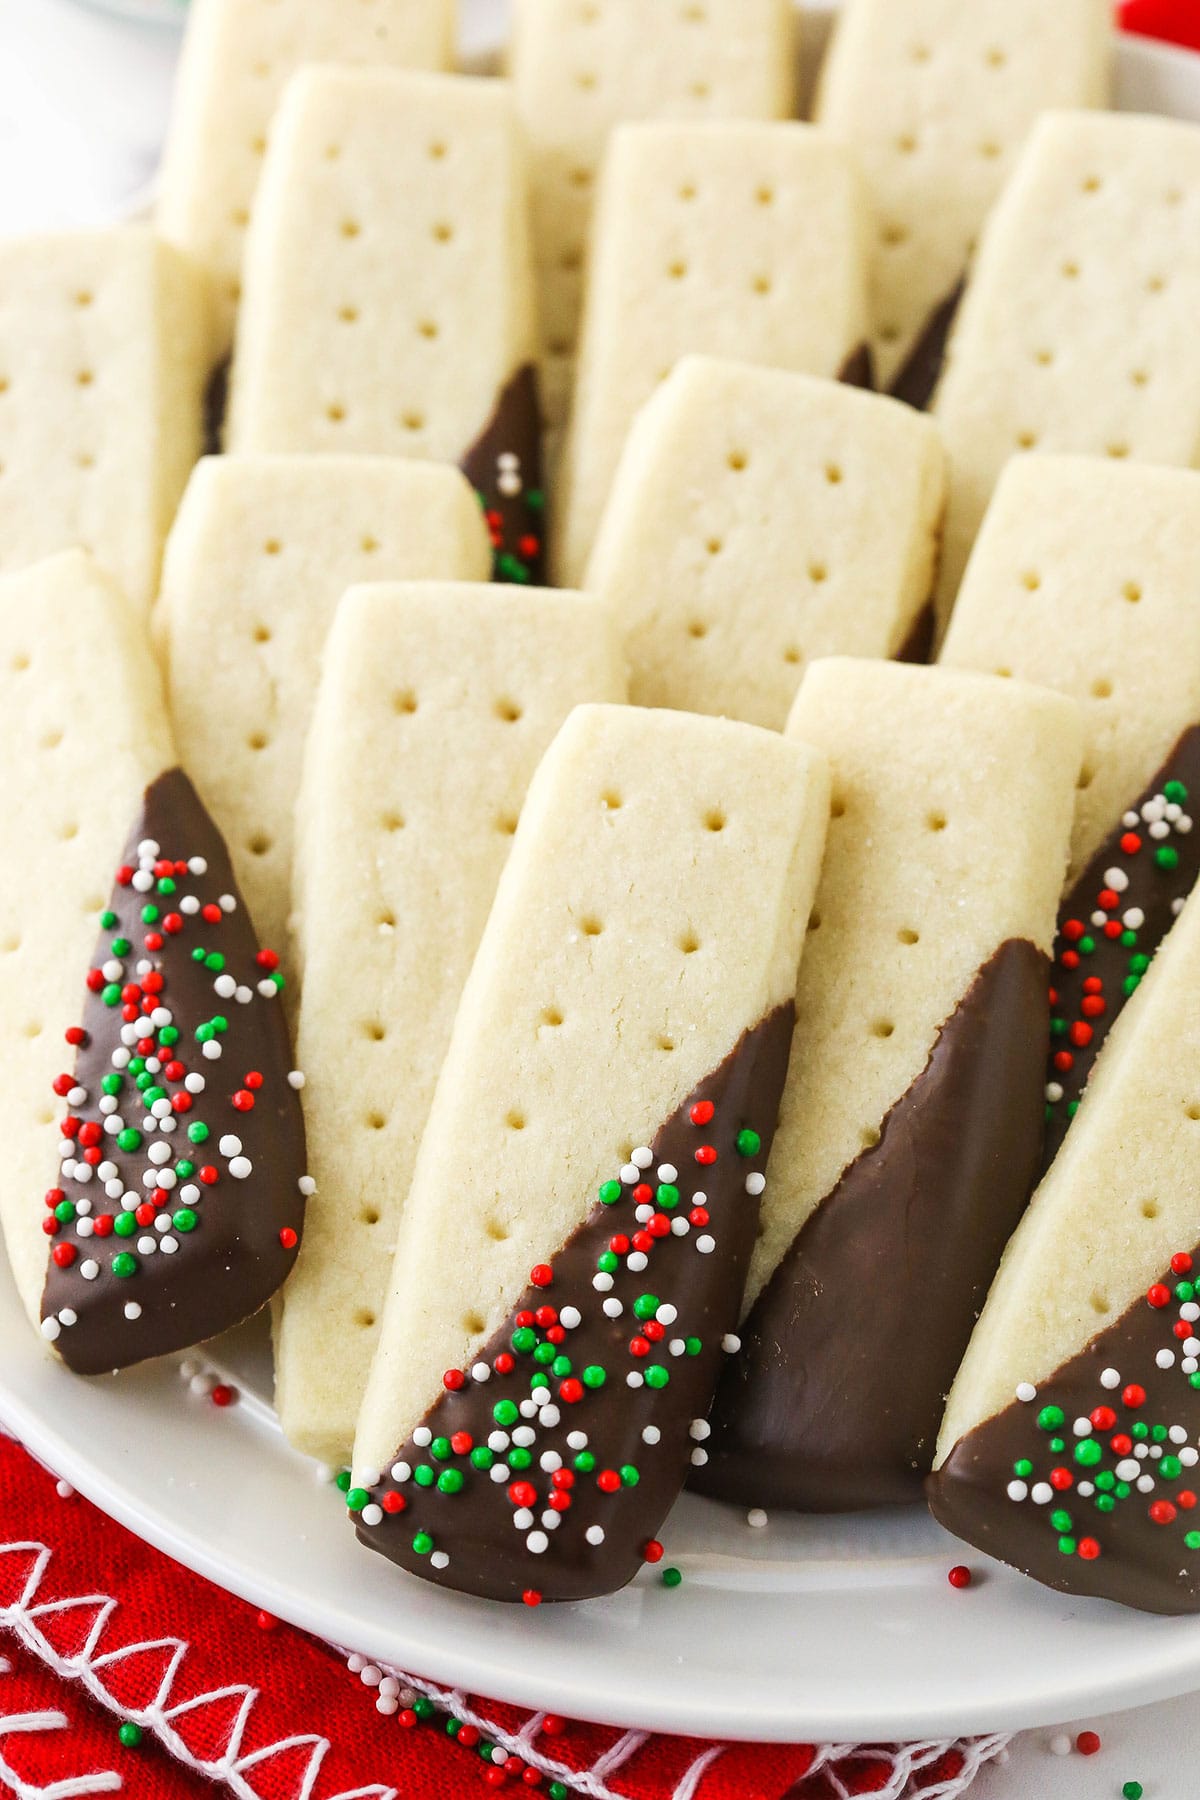 A close-up shot of chocolate covered shortbread cookies arranged on a white plate